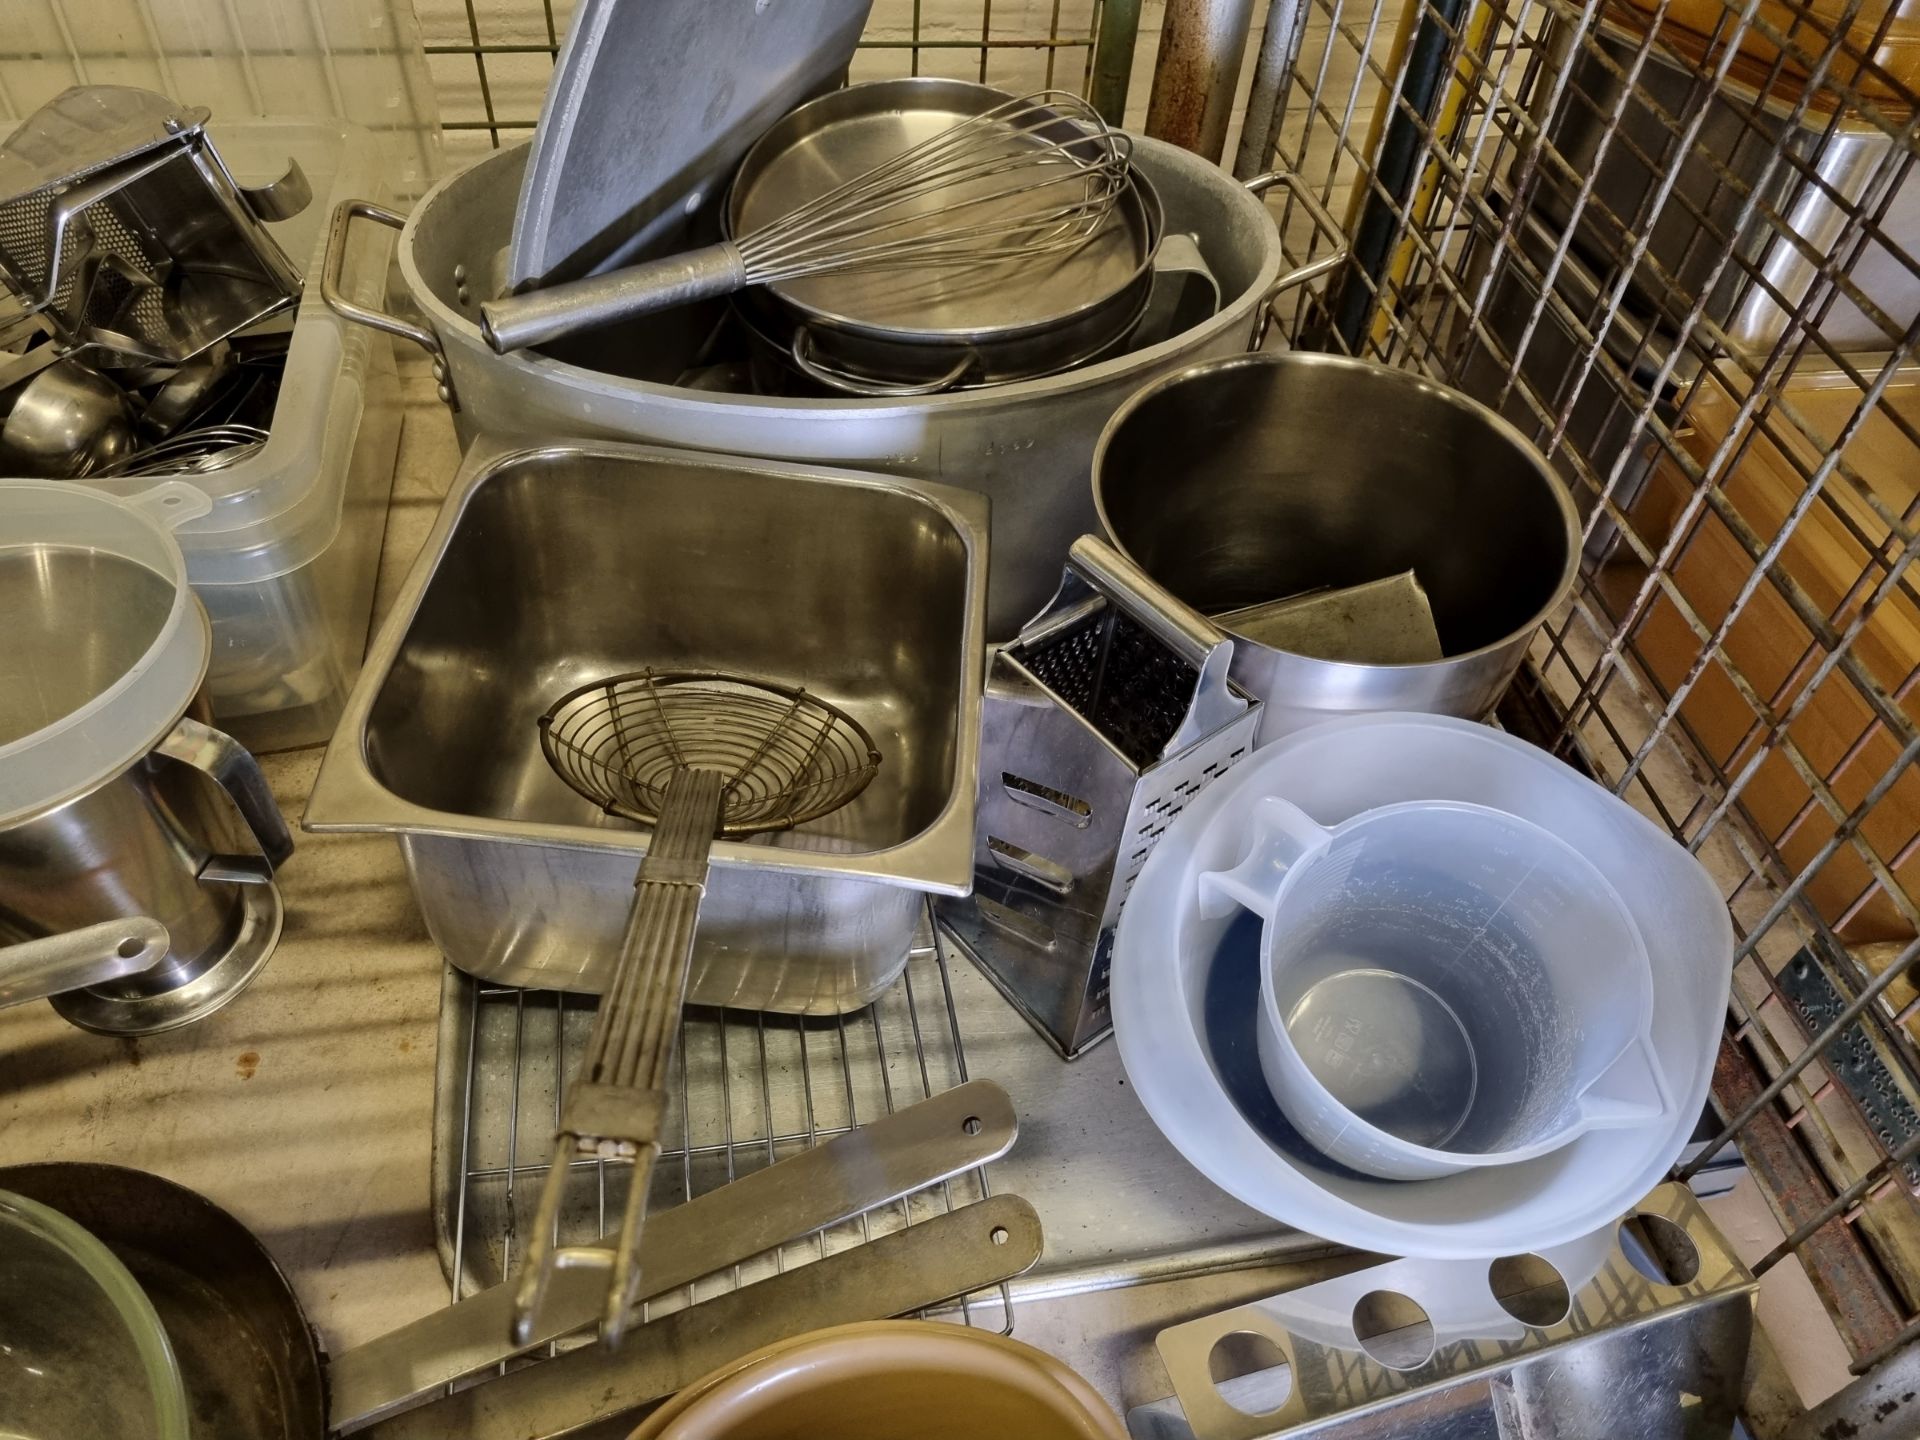 Catering equipment - pans, oven trays, mixing bowls, jugs, date stickers, frying pans and utensils - Image 6 of 6